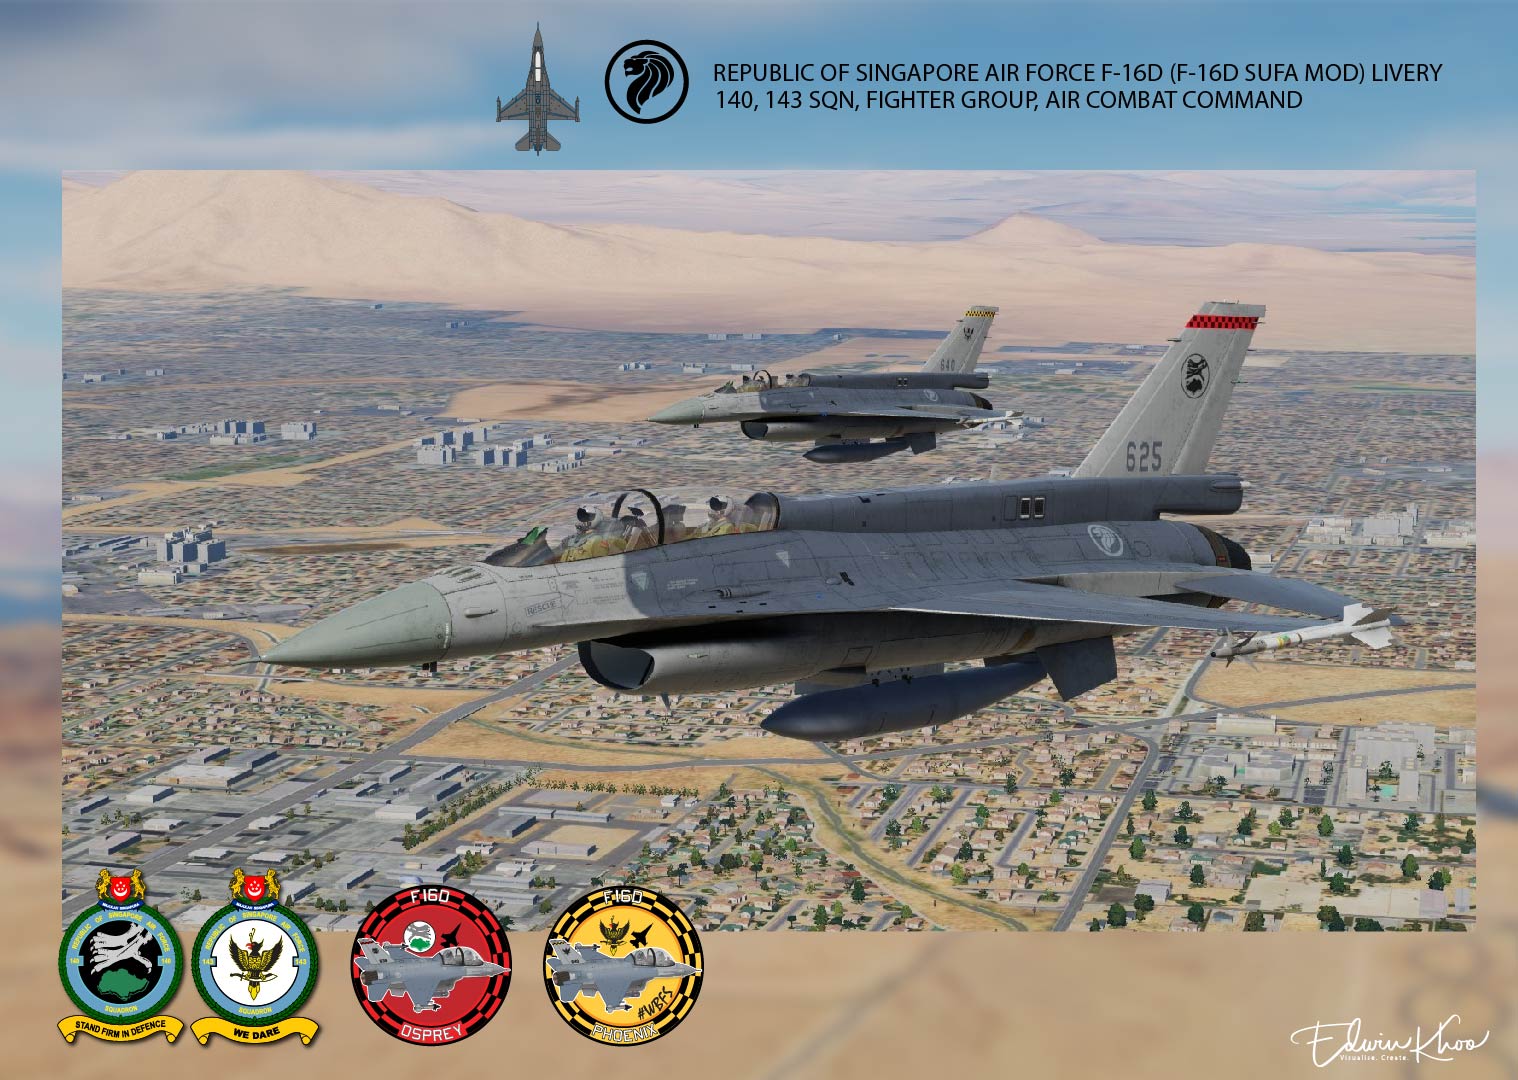 Republic of Singapore Air Force (RSAF) Livery for the F-16D (IDF Mods Project - F-16I Sufa v2.2) Part 1 of 3